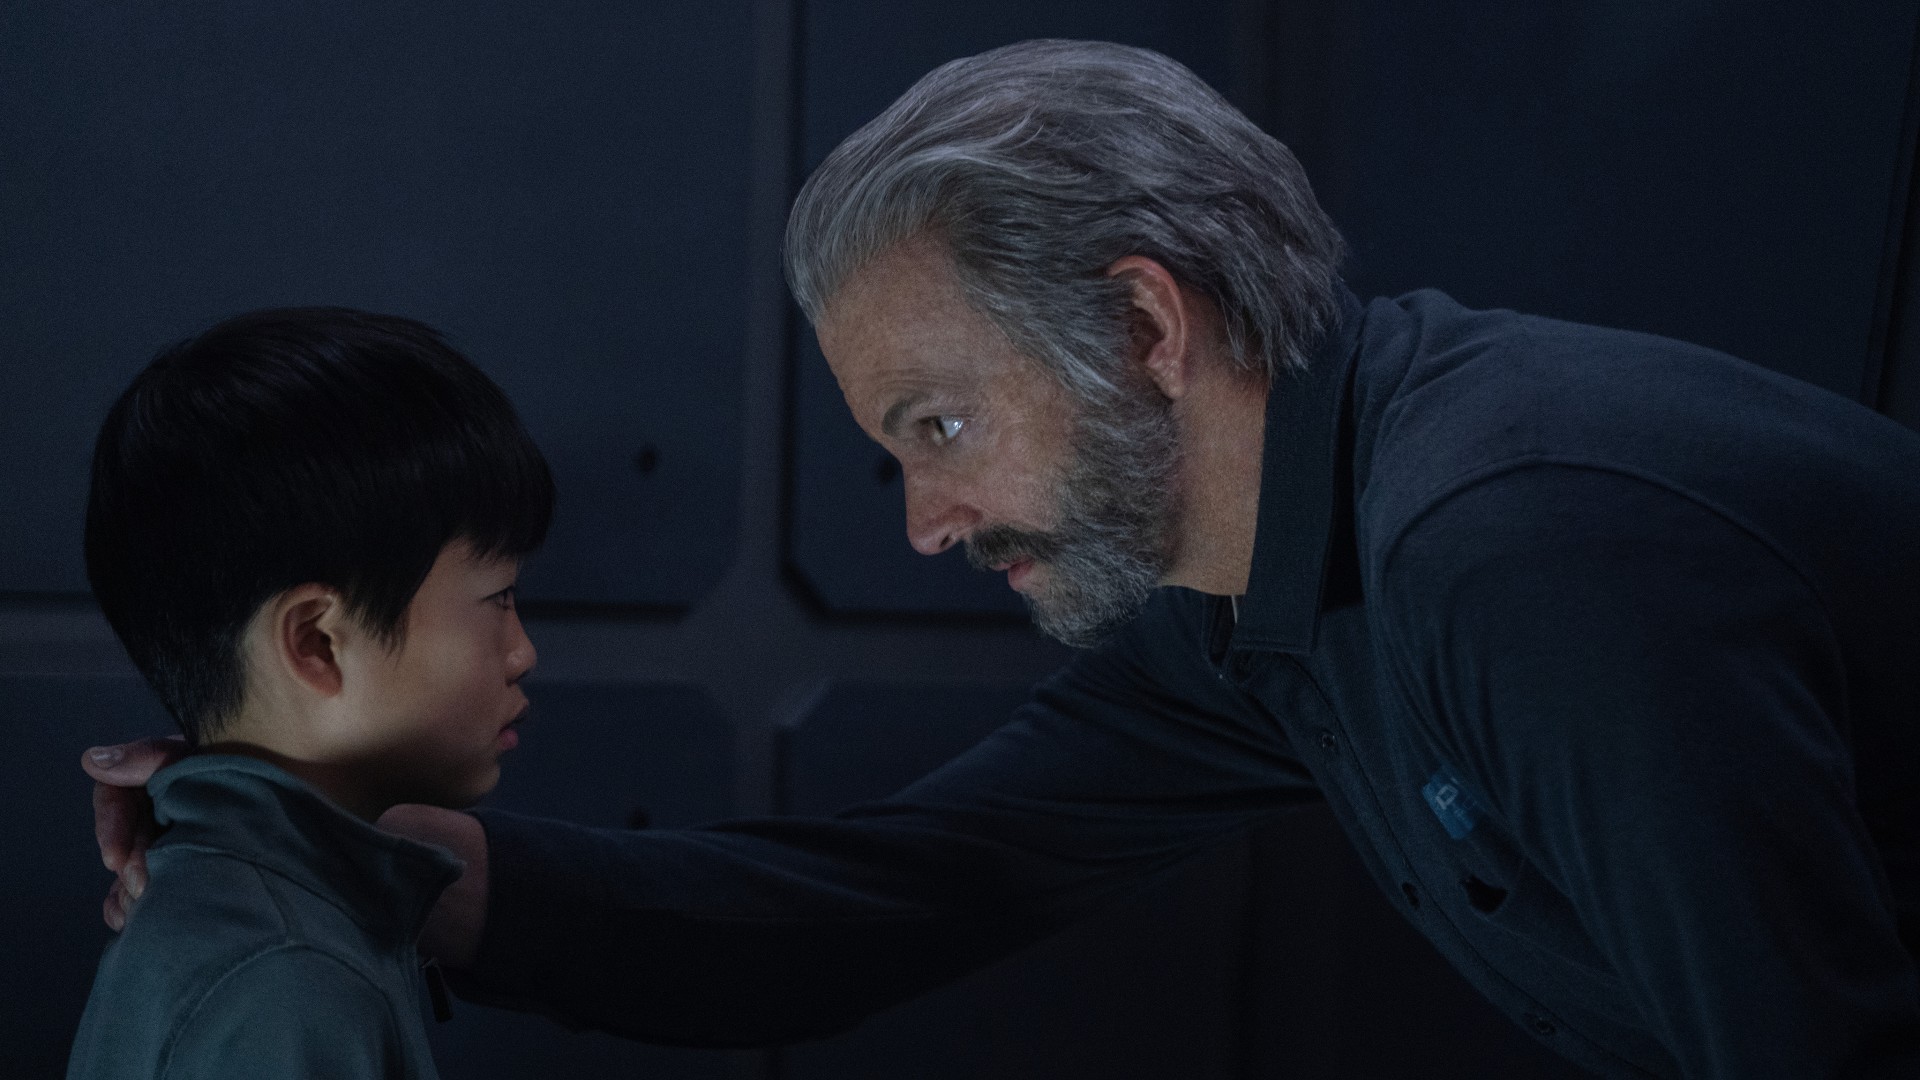 An older man (gray hair and beard) is crouching down and has his hand on the shoulder of a young boy in a caring manner.